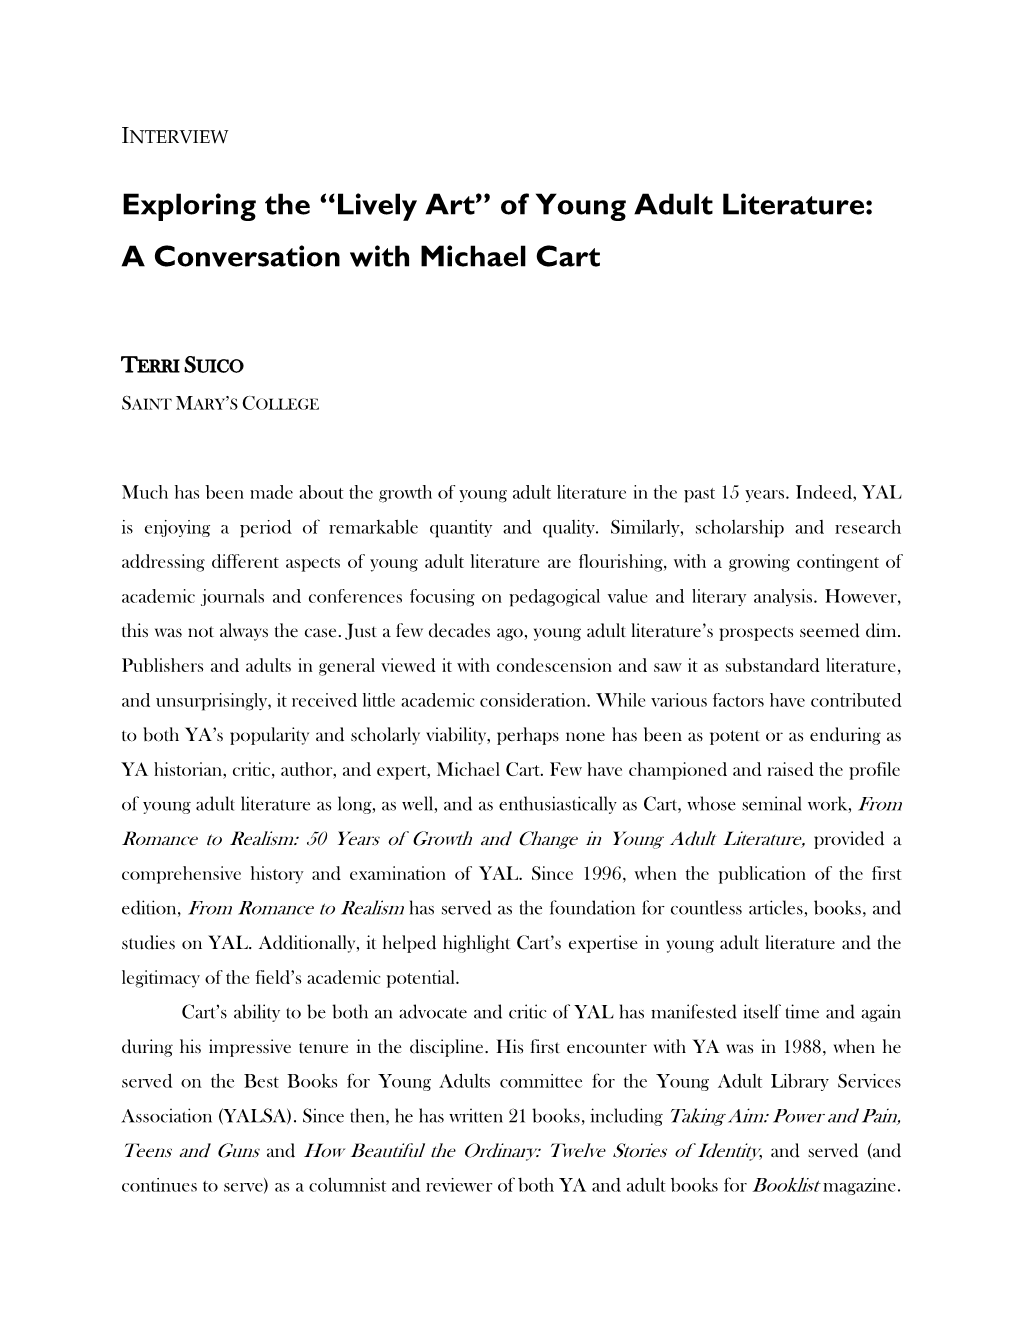 “Lively Art” of Young Adult Literature: a Conversation with Michael Cart